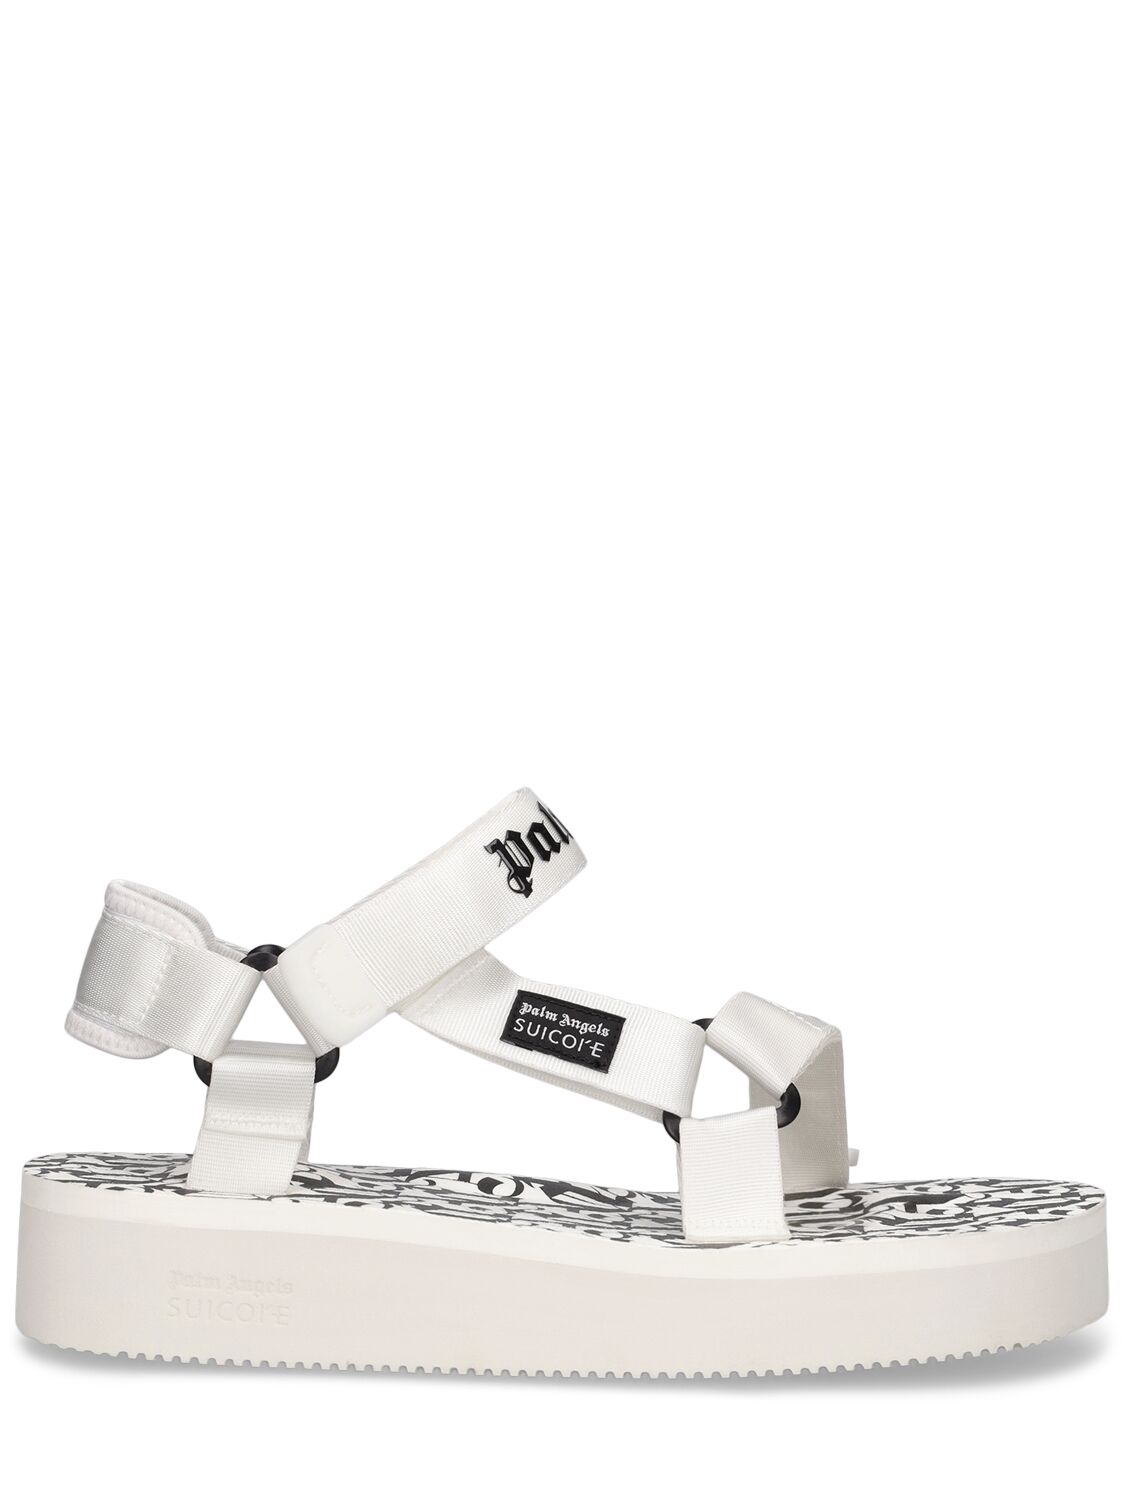 Palm Angels X Suicoke Sandals In White